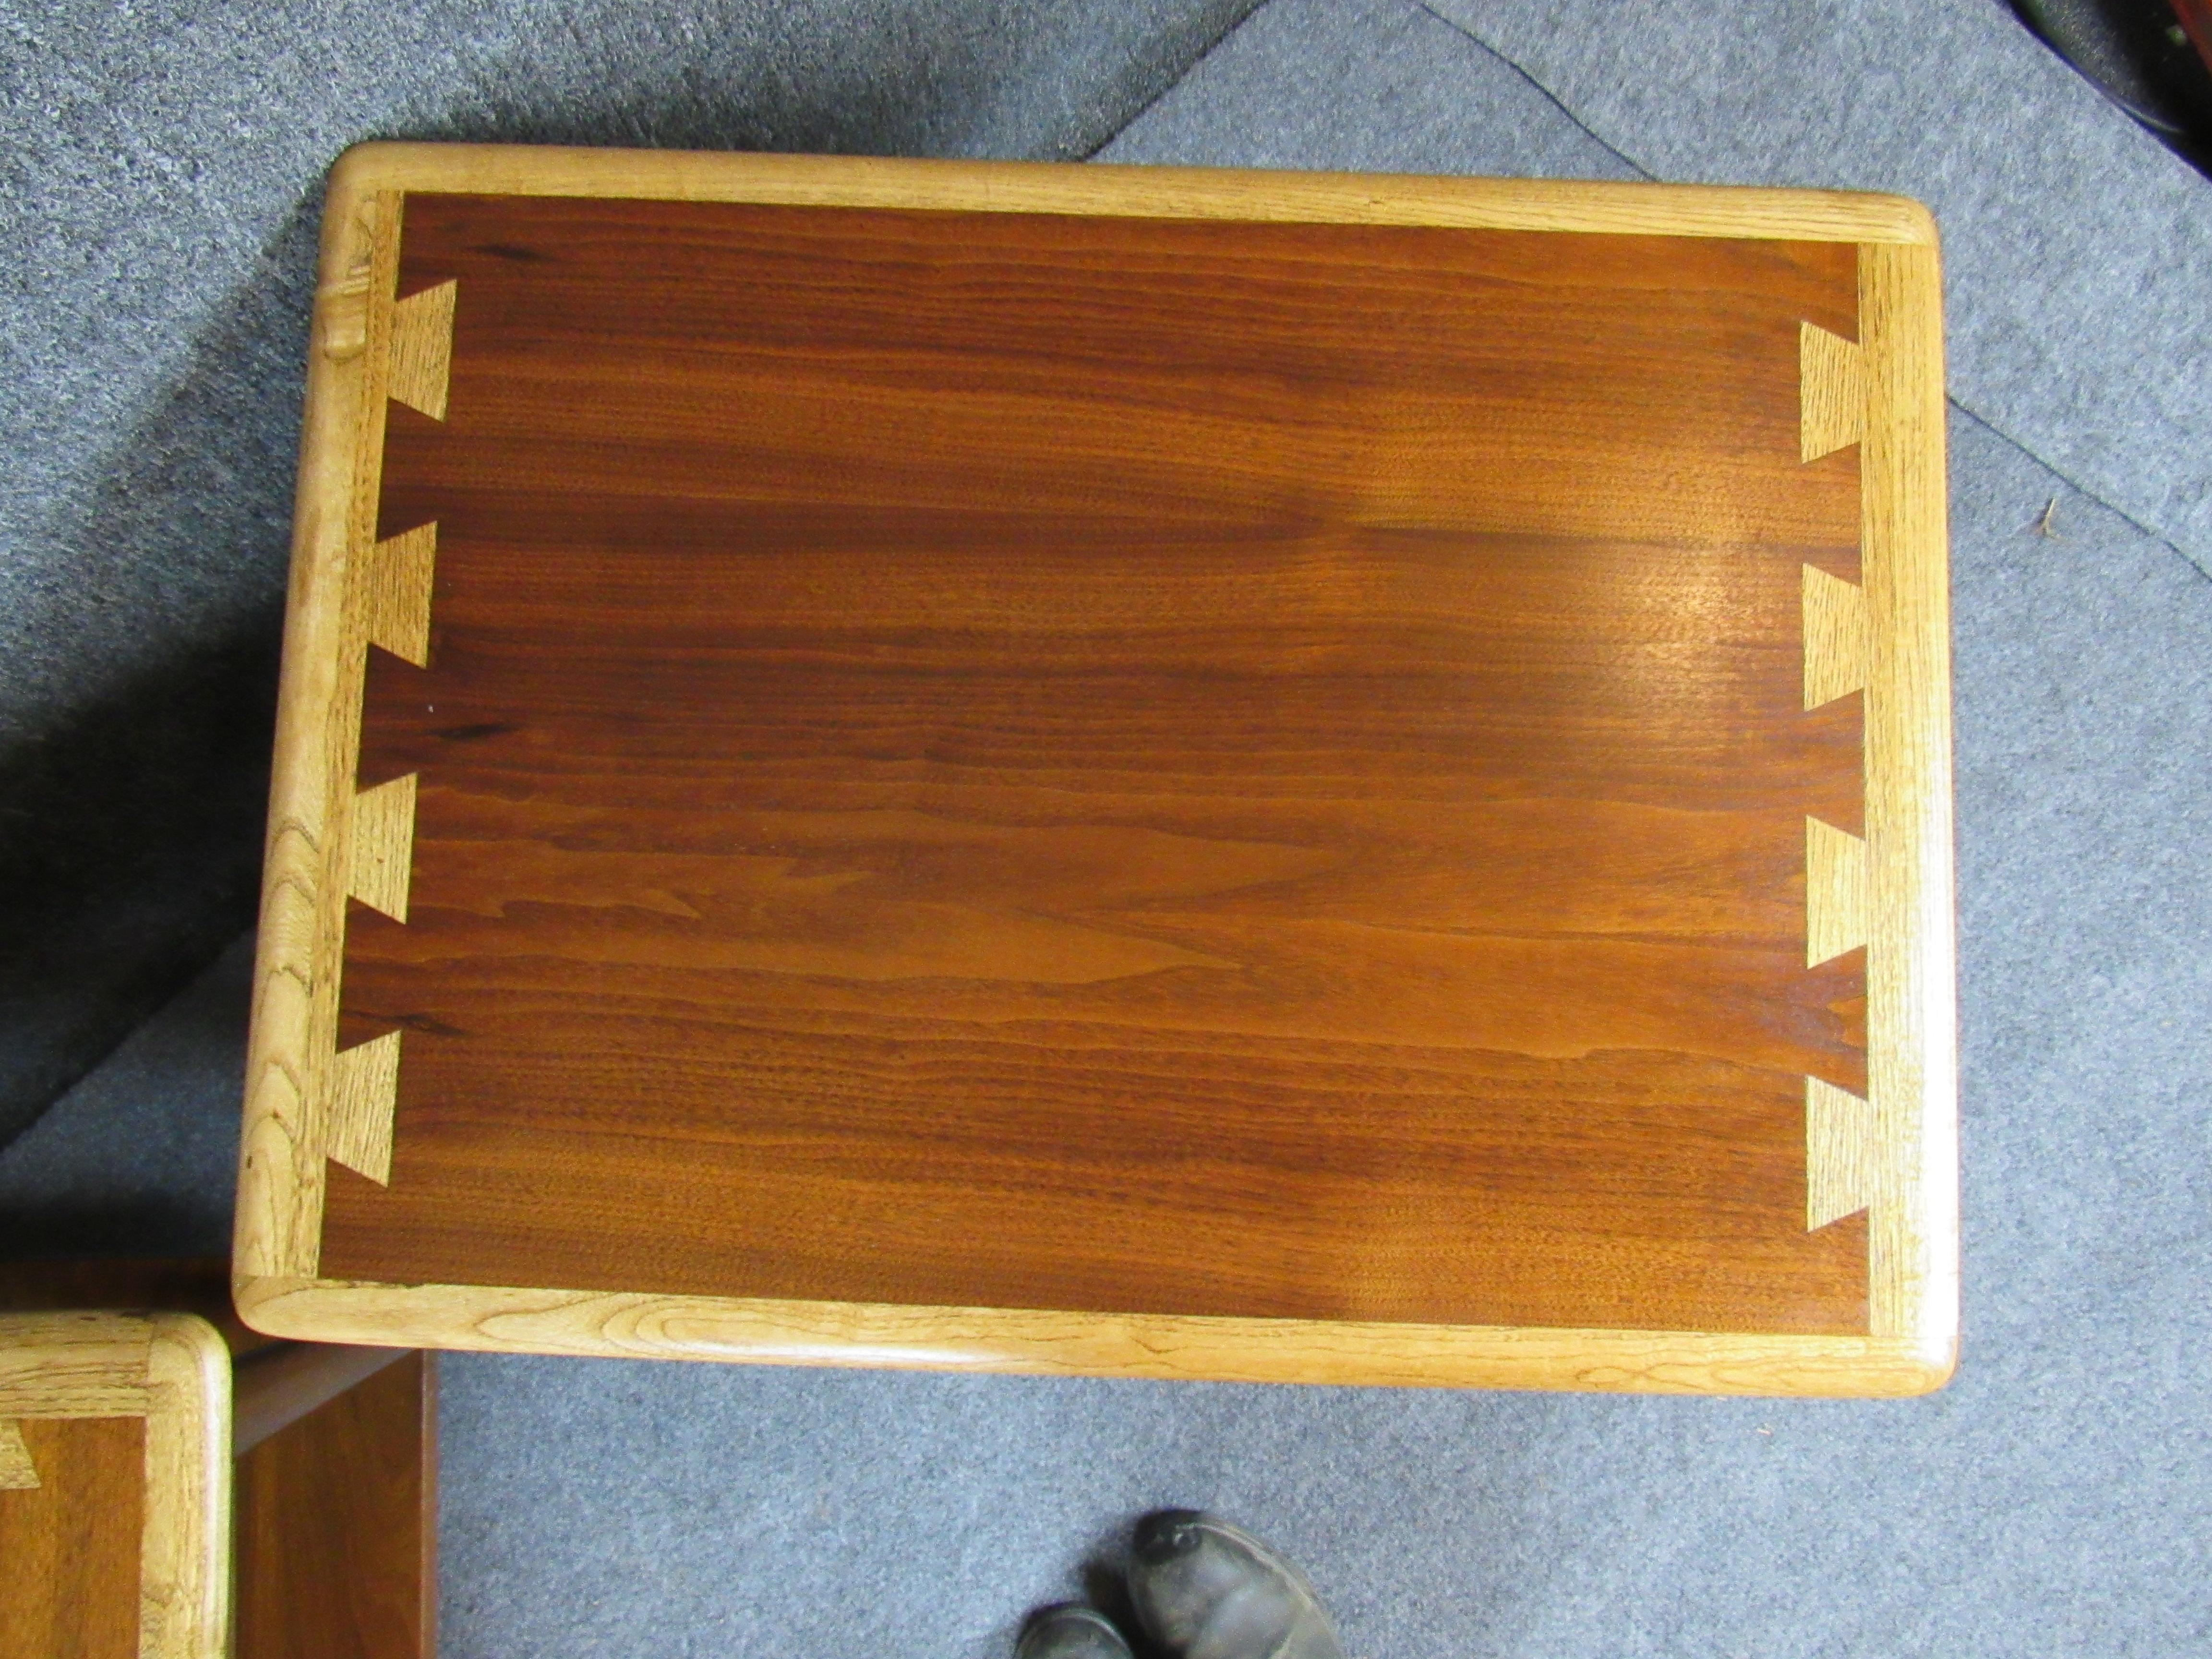 A pair of vintage walnut side tables by Lane, these show off a rich wood grain with dovetailed sides to the table's top. 
Please confirm item location with seller (NY/NJ).